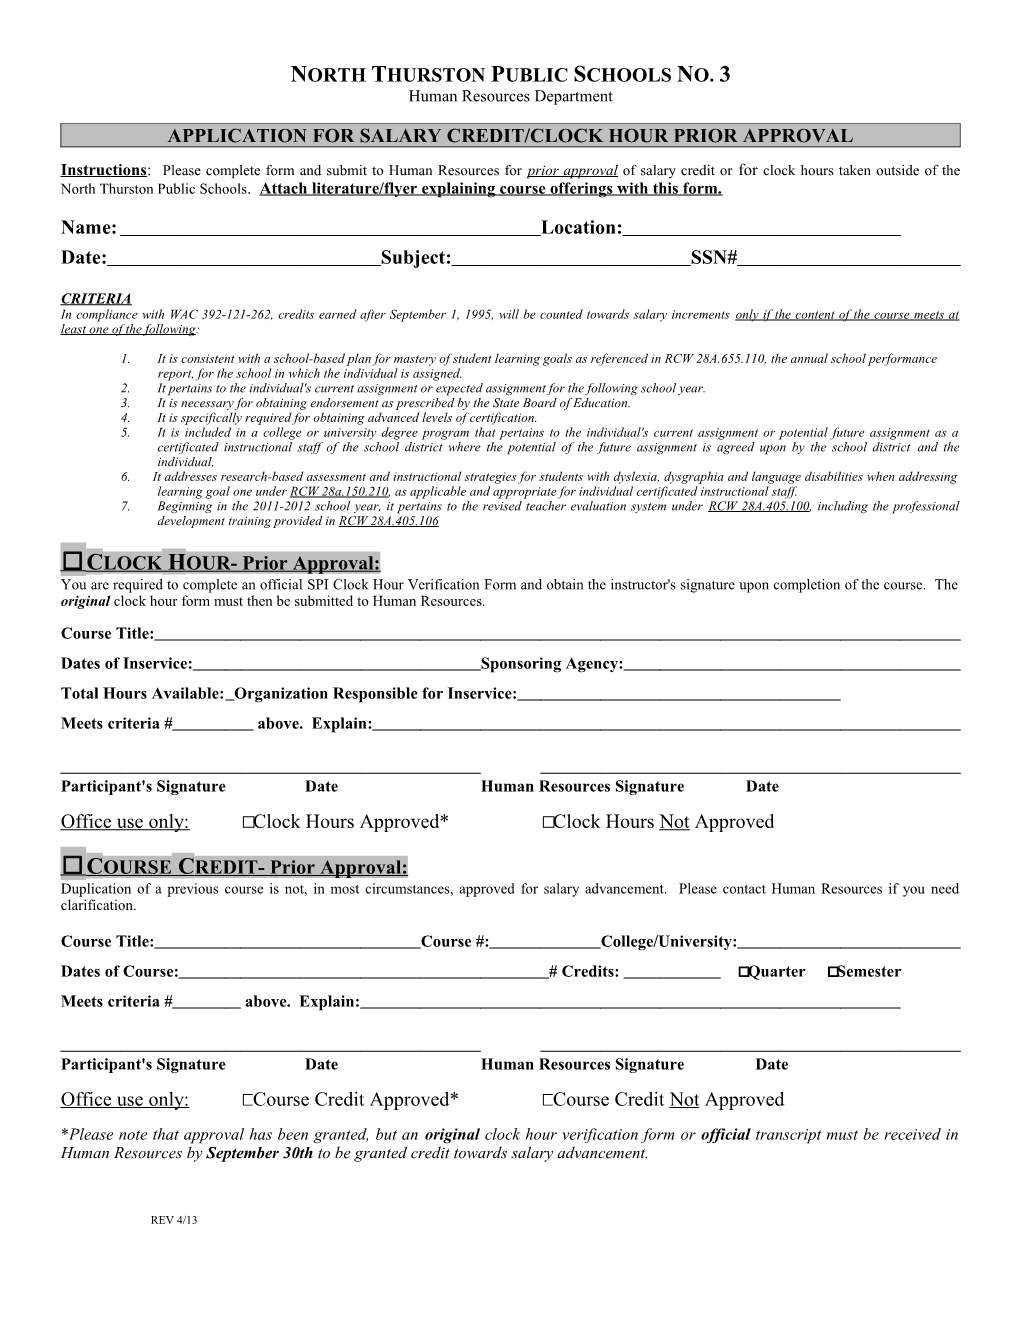 Prior Approval Form for CR/CH